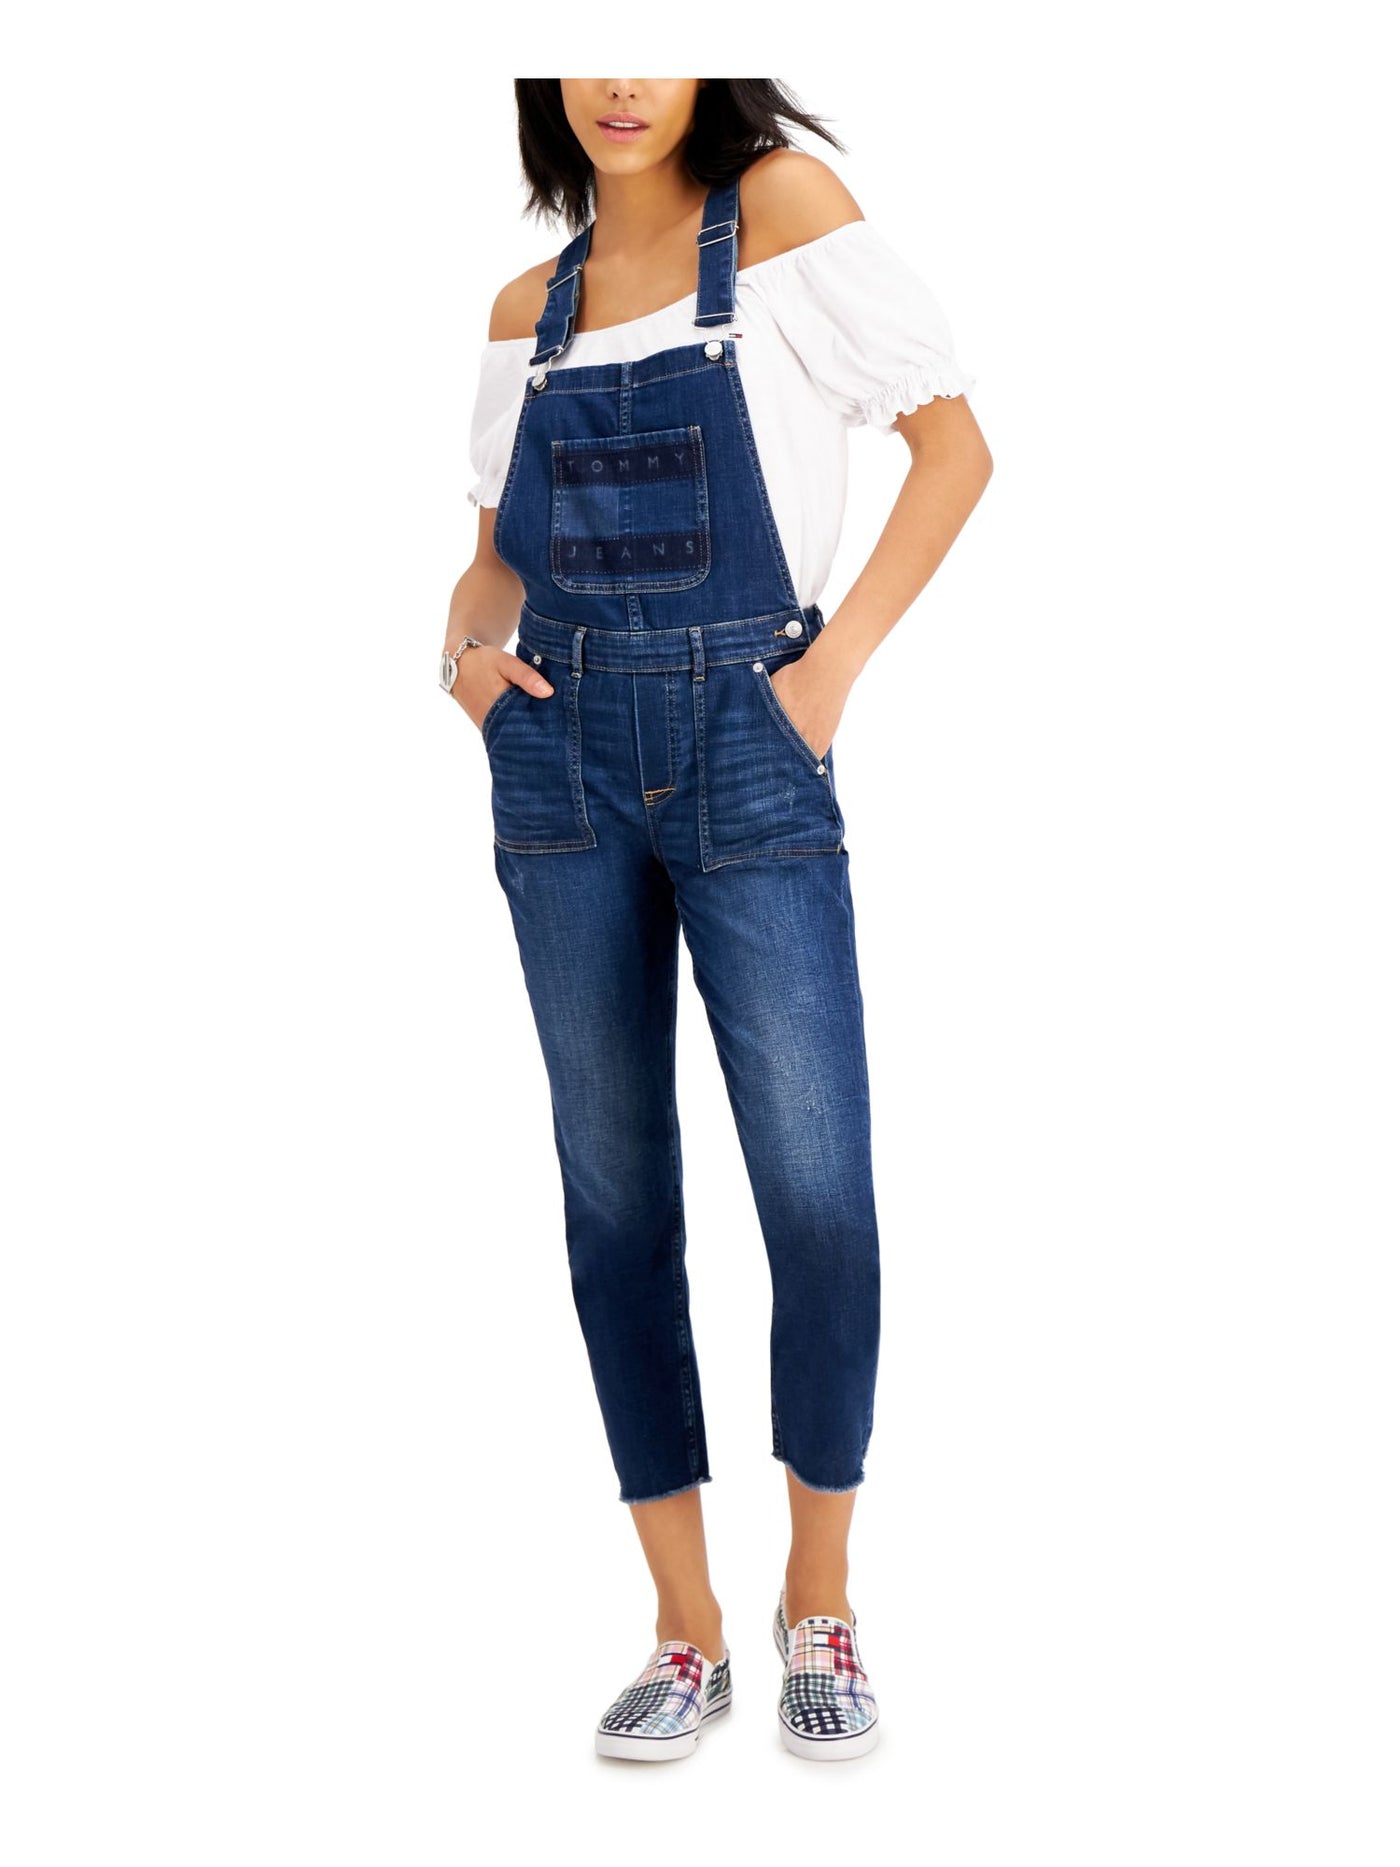 TOMMY JEANS Womens Blue Denim Distressed Pocketed Bib Overalls Adjustable Straps Logo Graphic Sleeveless Square Neck Cropped Jumpsuit 2/26